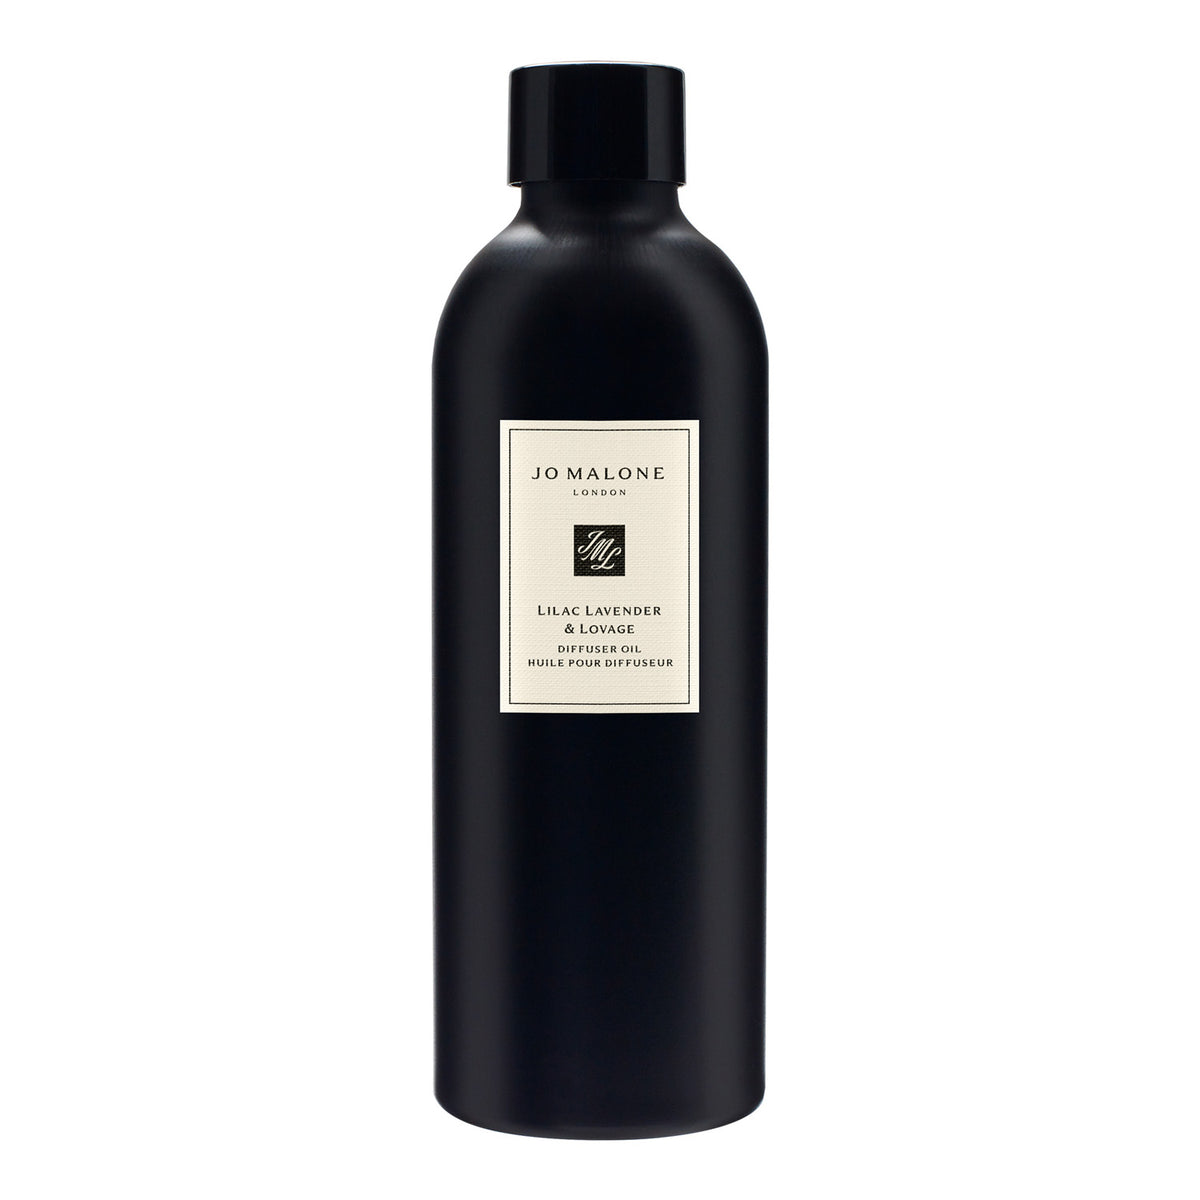 Lilac Lavender & Lovage Townhouse Refill, 350ml